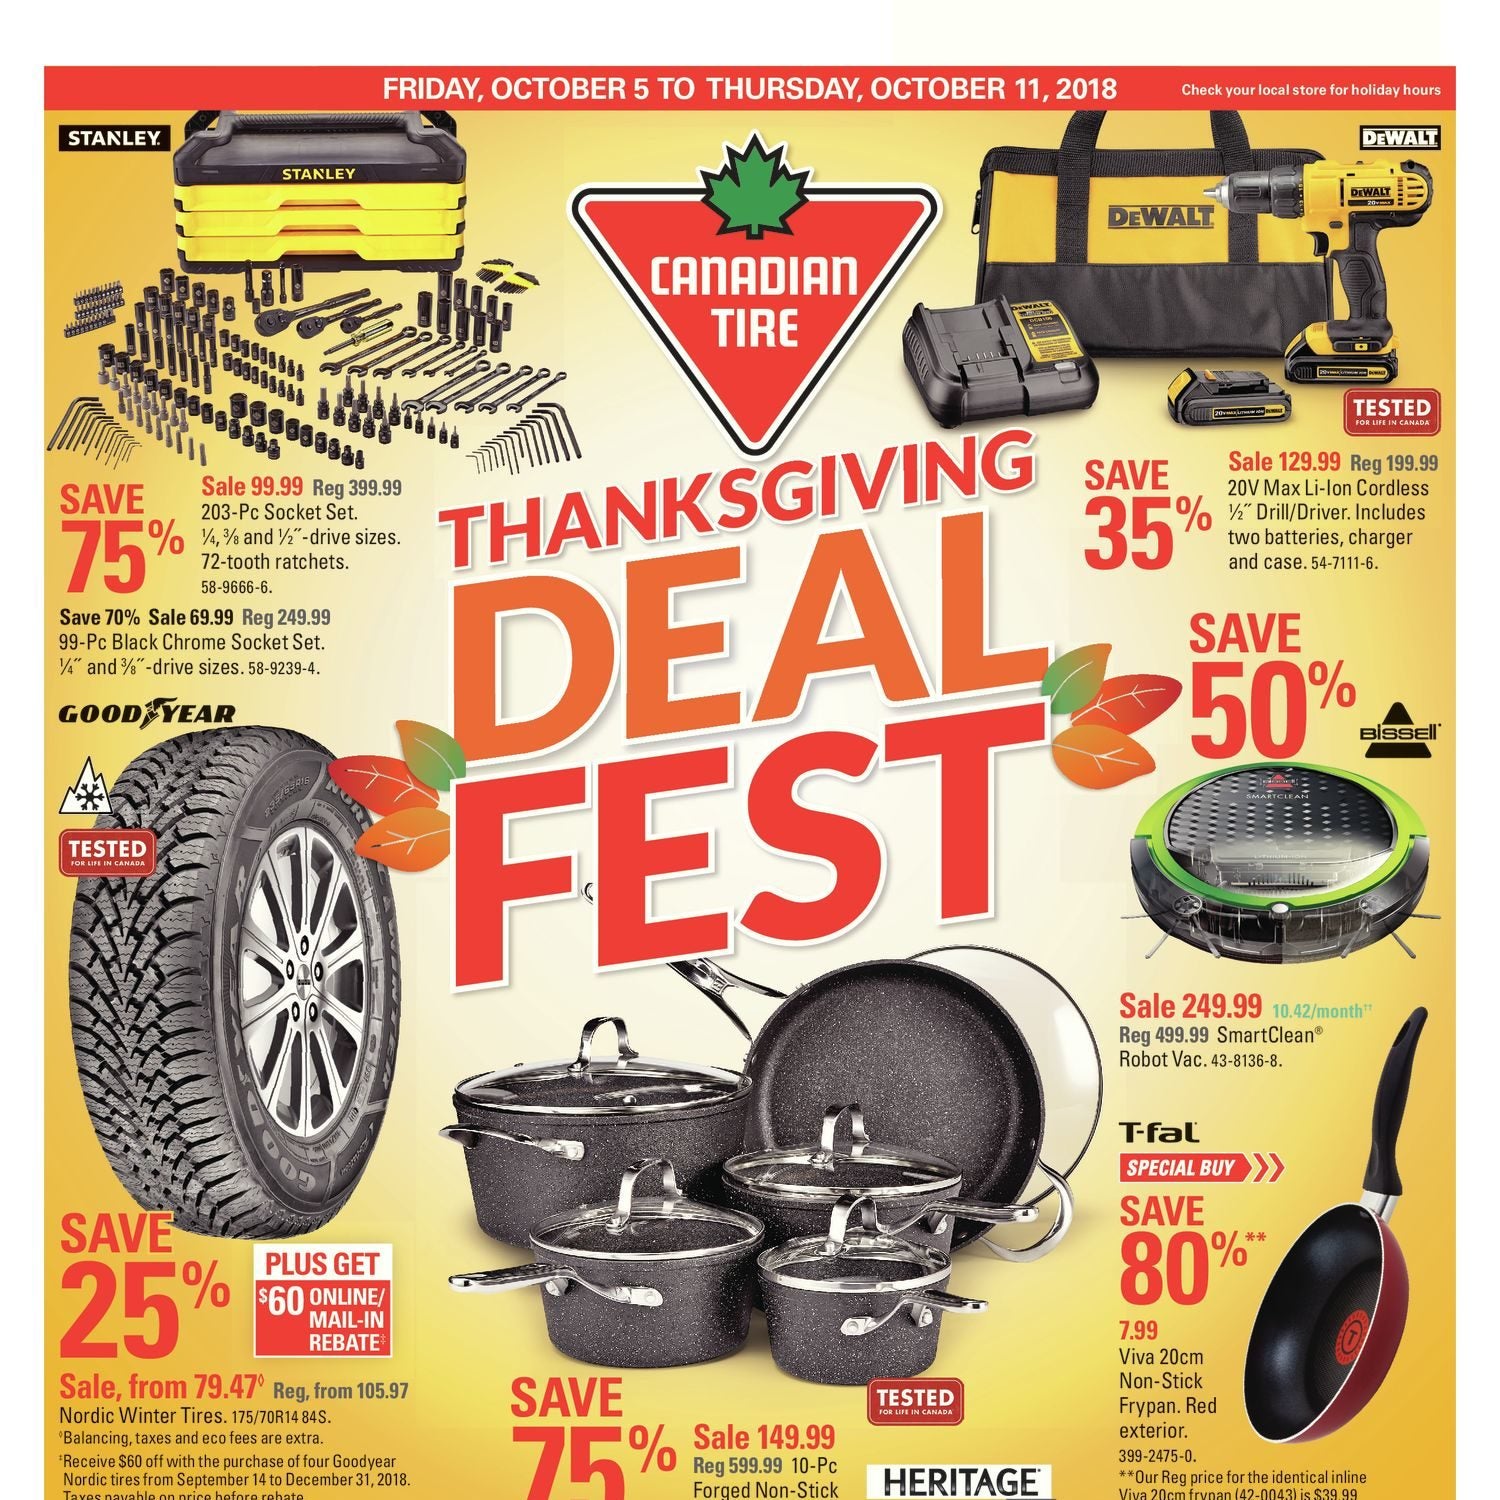 Canadian Tire Weekly Flyer Weekly Thanksgiving Deal Fest Oct